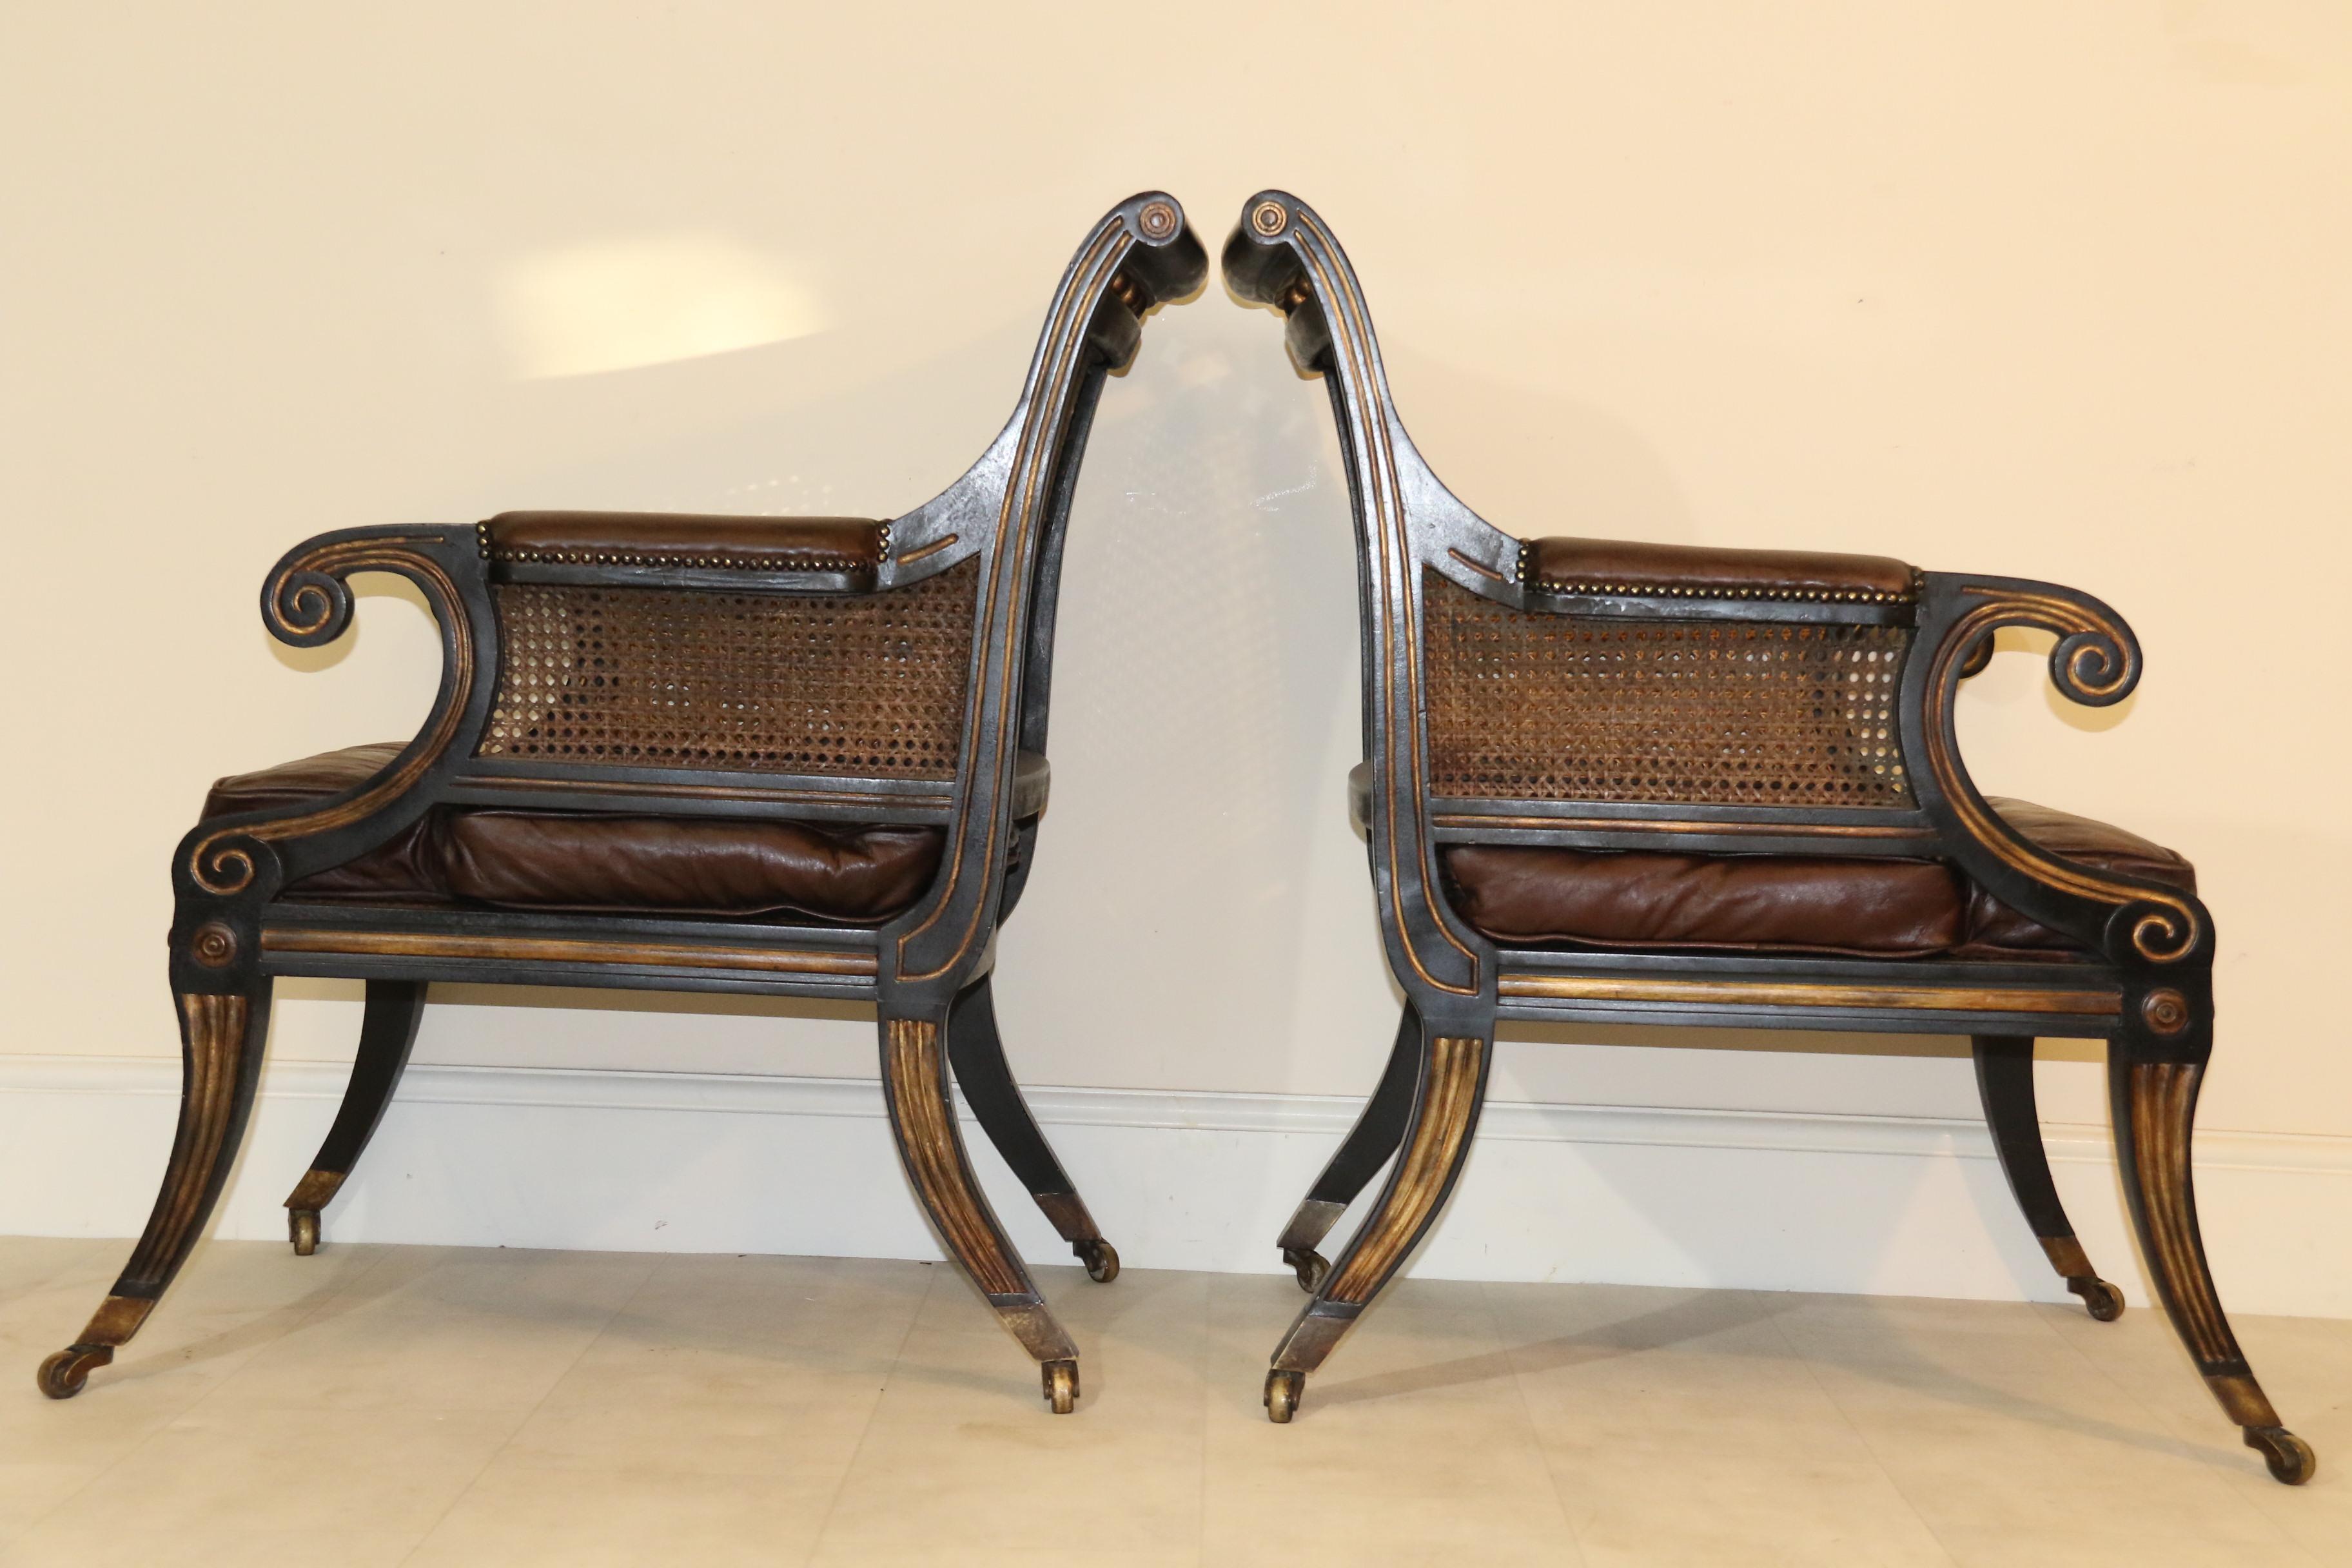 Early 20th Century Pair of English Regency Style Ebonized and Gilt Library Chairs For Sale